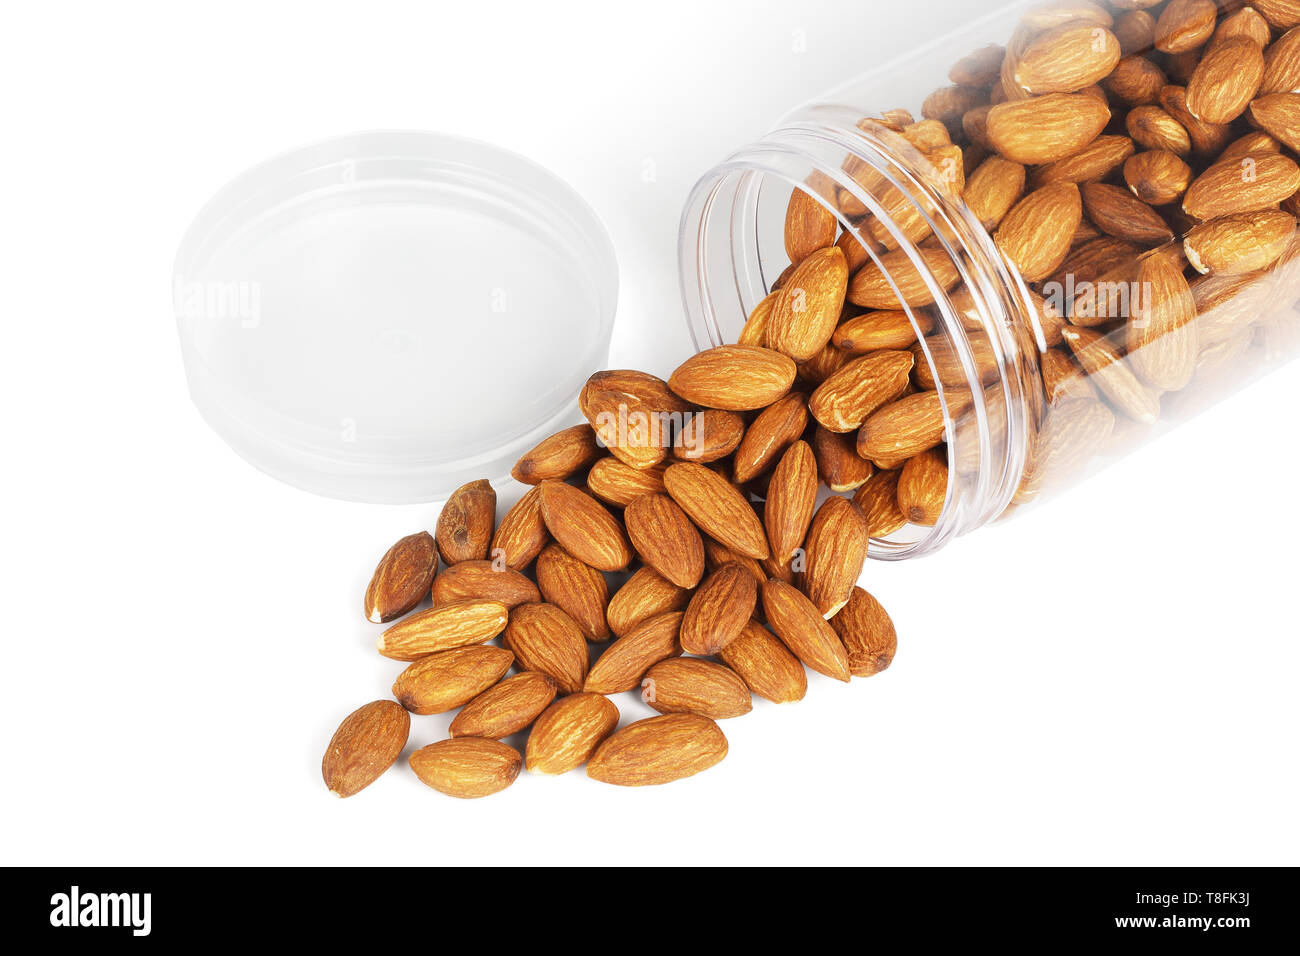 Almond Nuts Spilled Out From Plastic Container on White Background Stock Photo